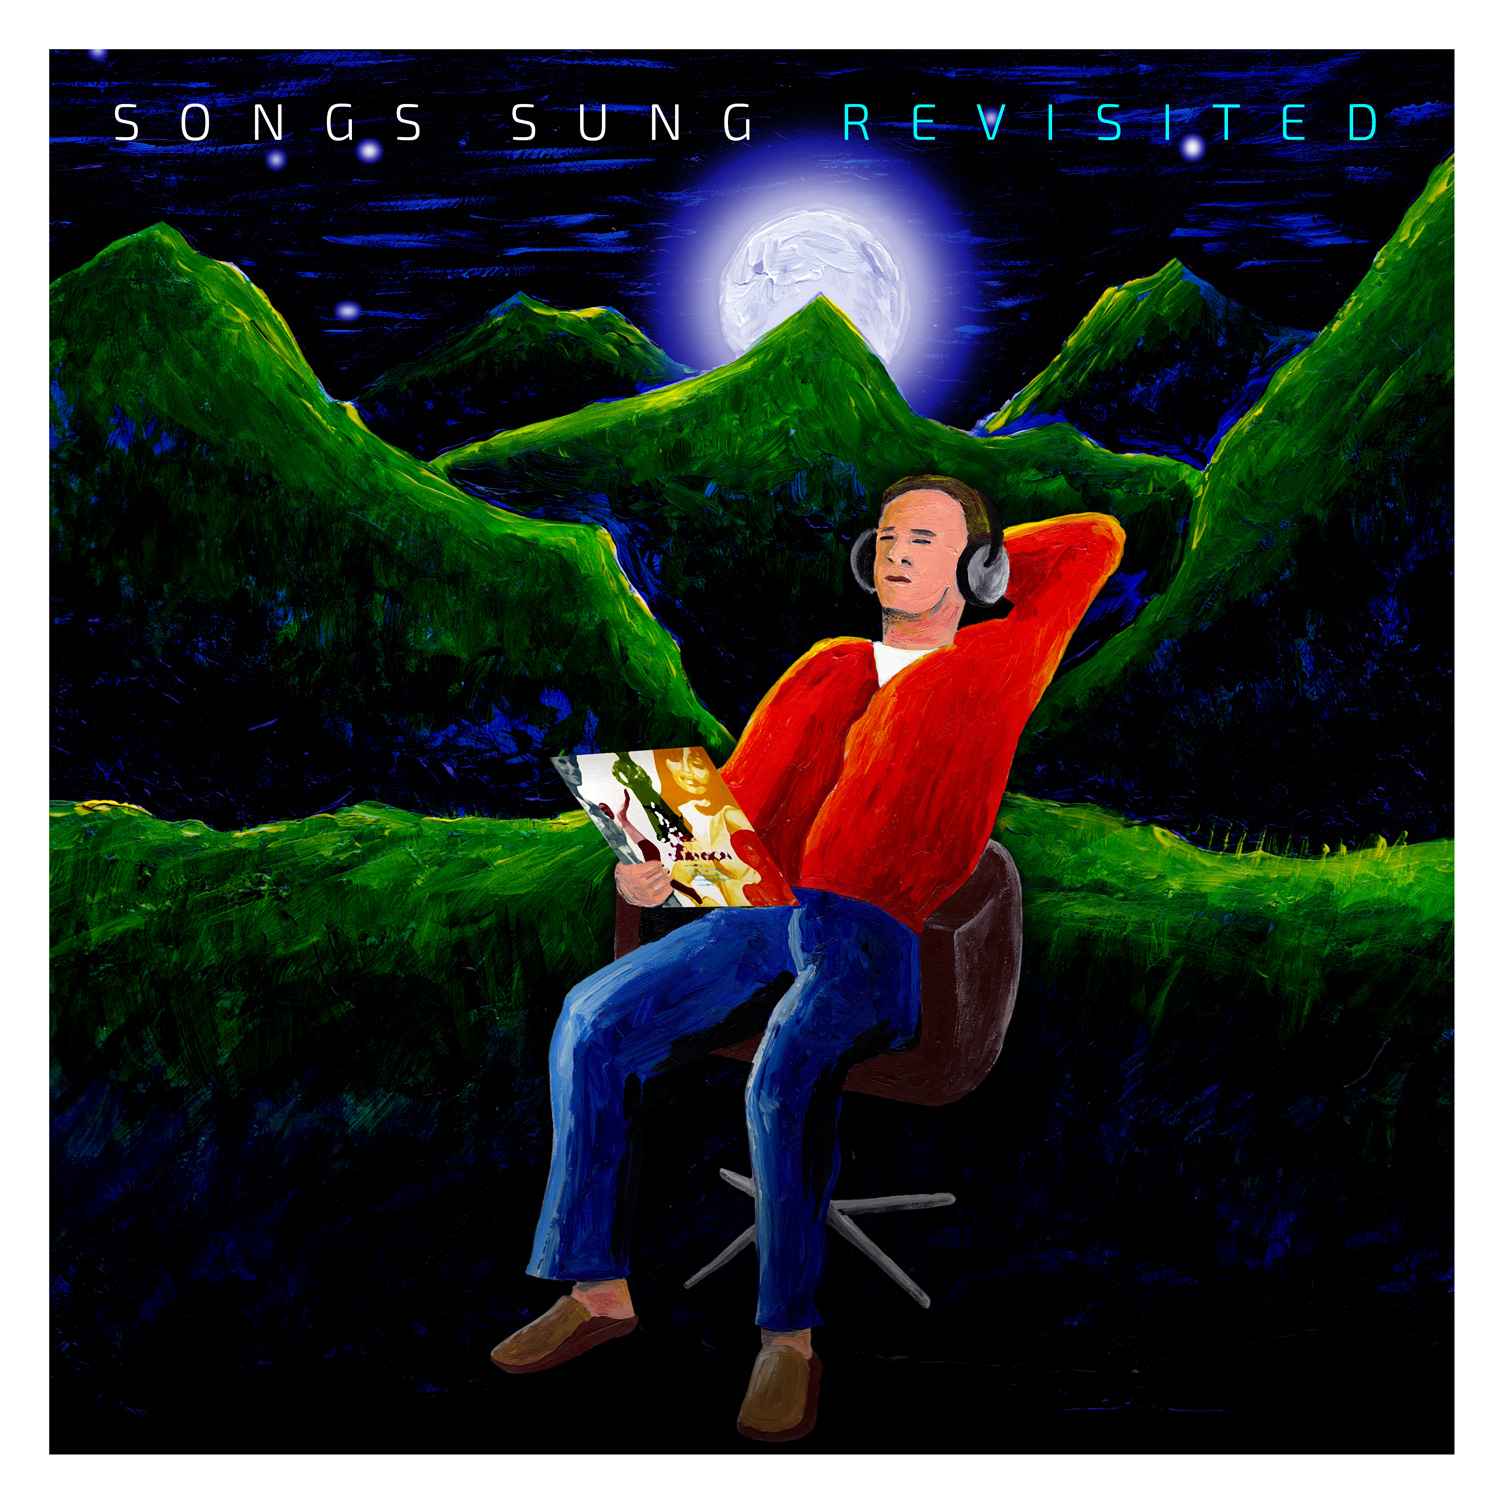 Songs Sung album front cover